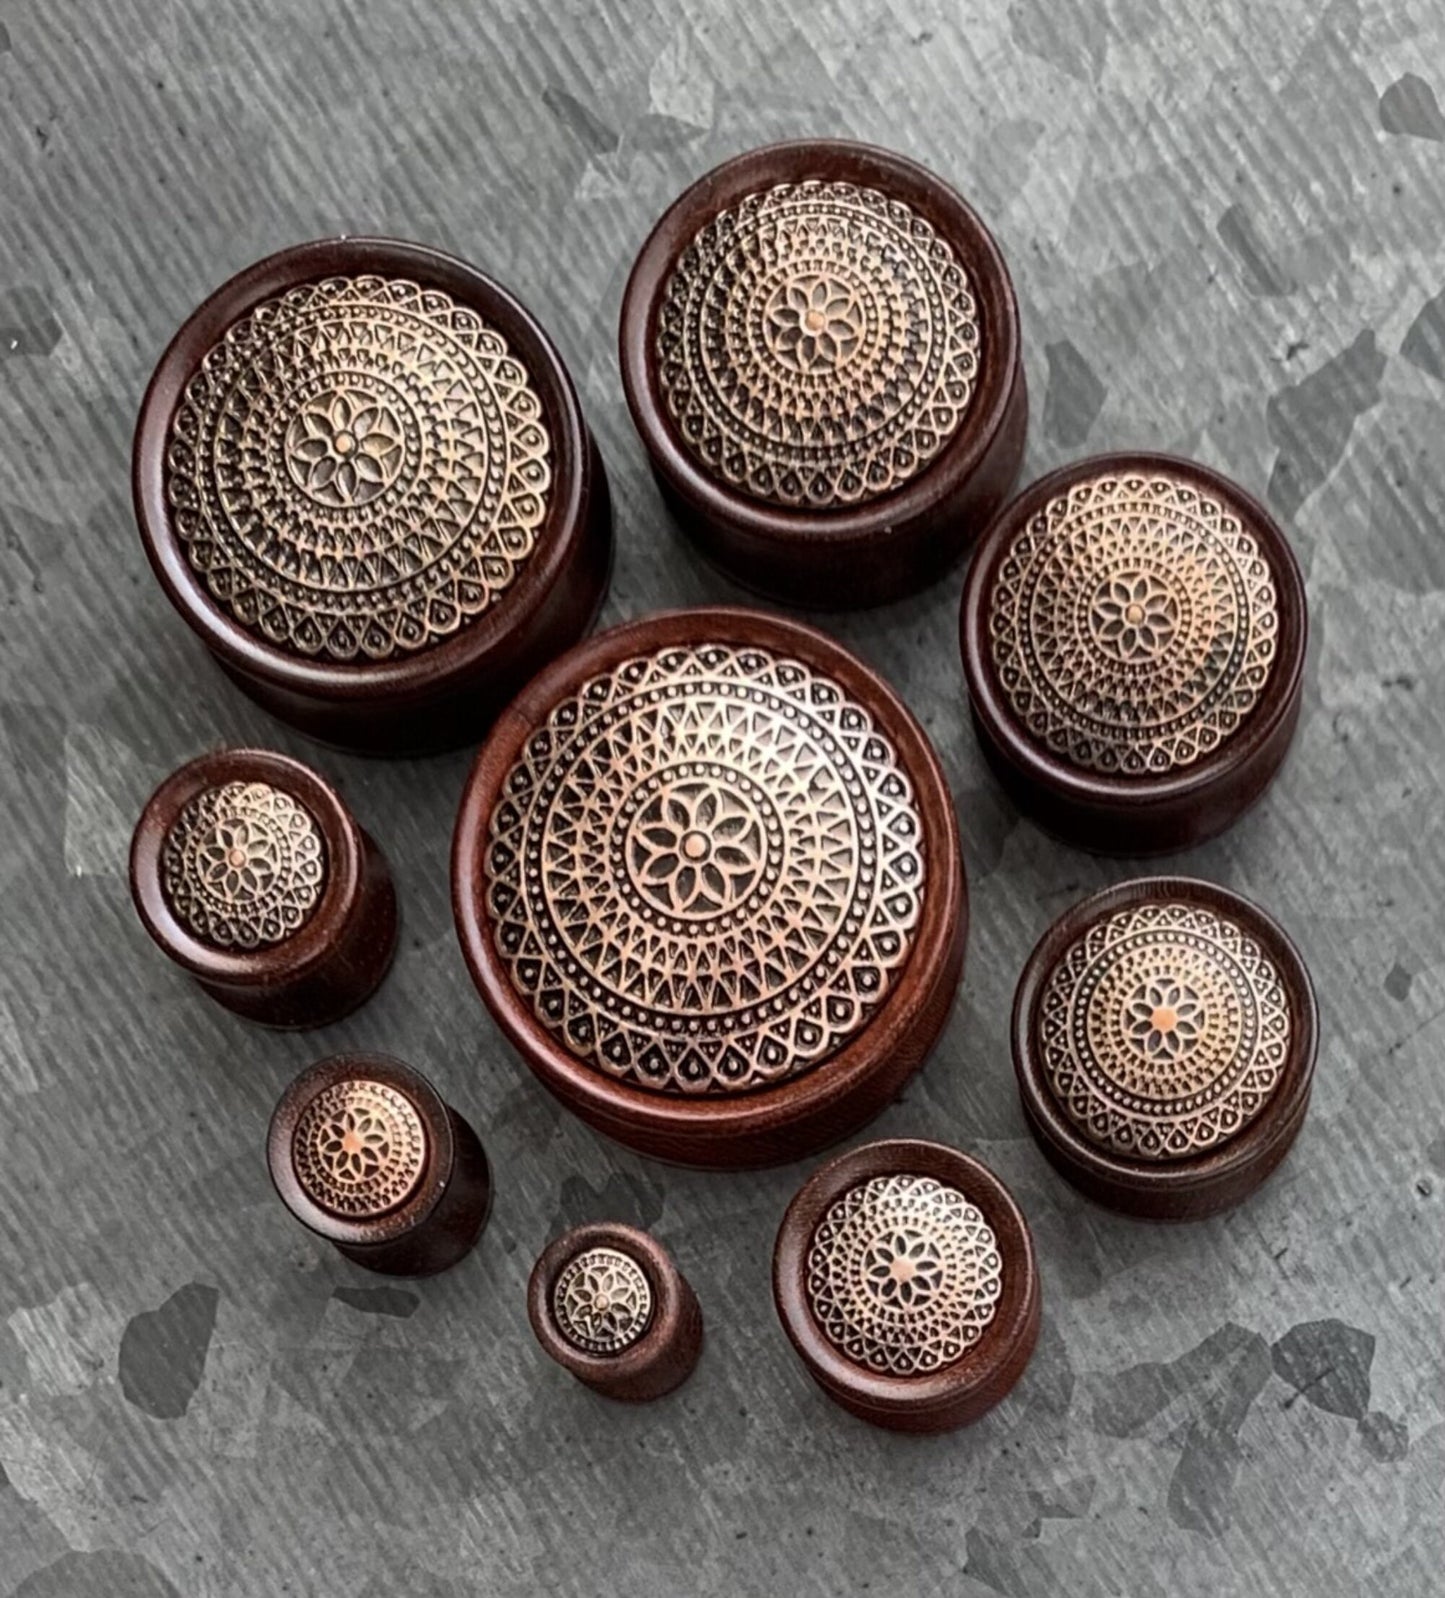 PAIR of Unique Organic Rose Wood with Flower Lattice Pattern Saddle Plugs - Gauges 2g (6mm) up to 1" (25mm) available!